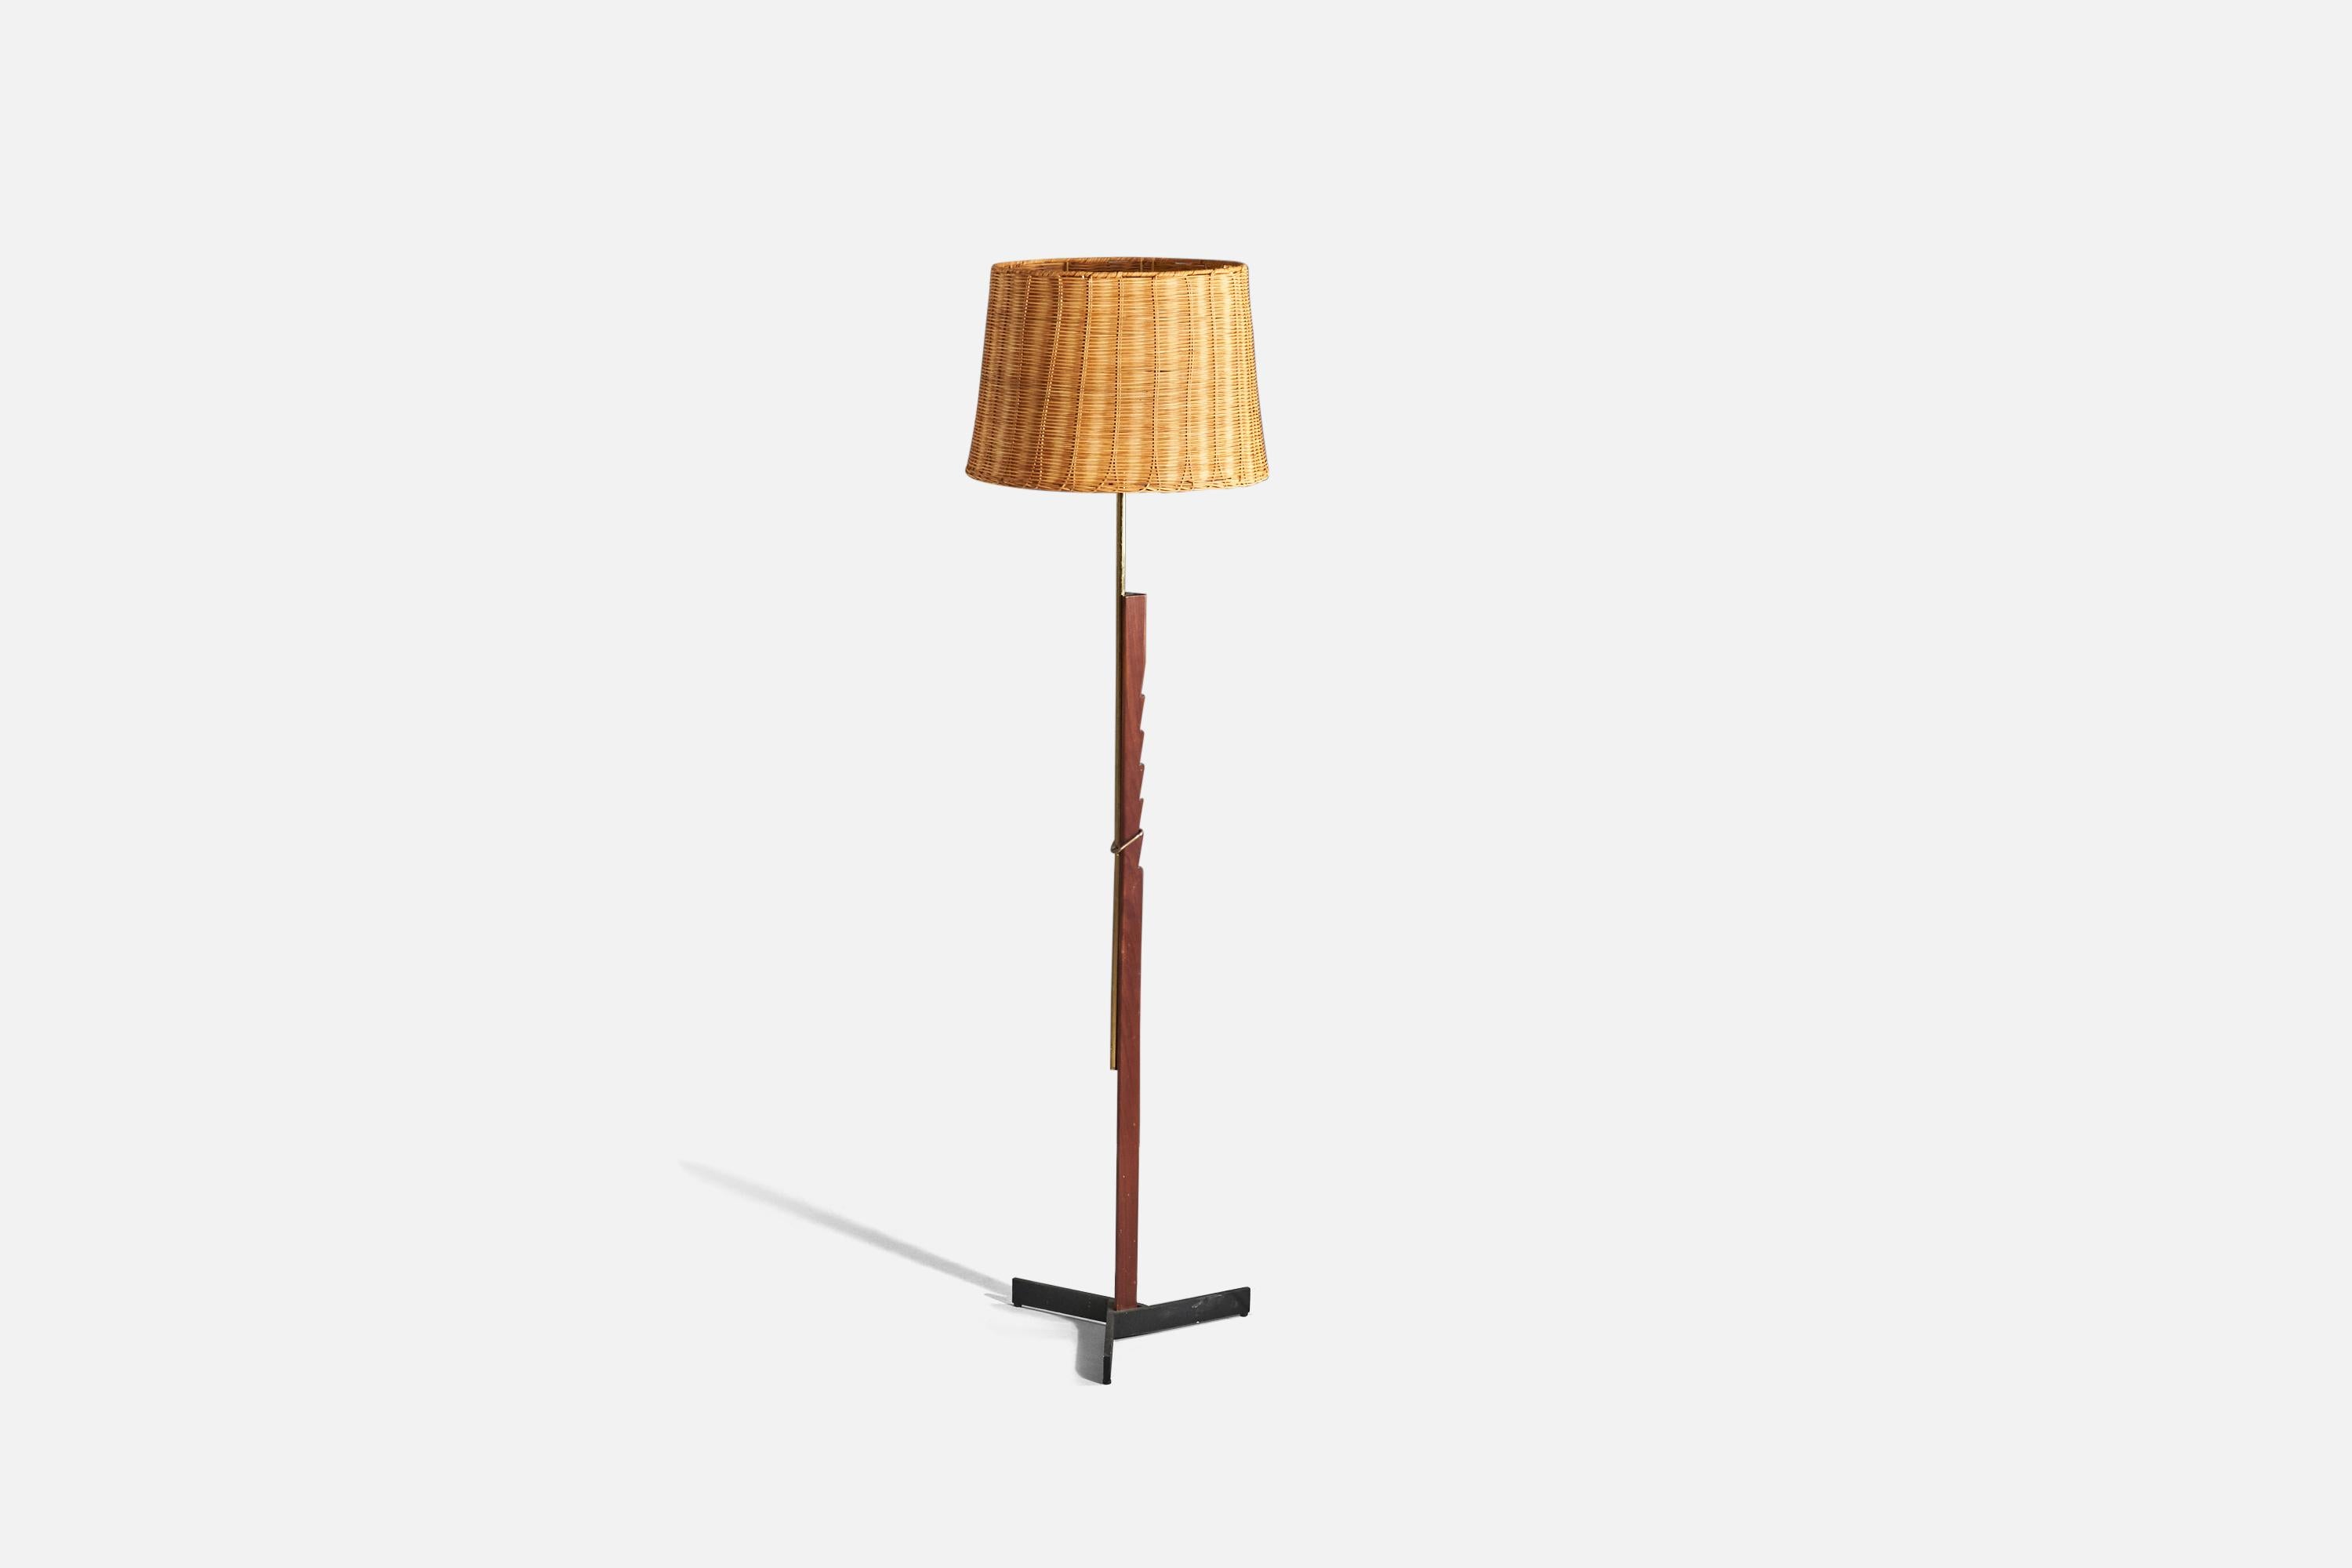 A brass, cast iron, teak and rattan, adjustable floor lamp; design attributed to Svend Aage Holm Sørensen, Denmark, 1950s.

Variable dimensions, measured as illustrated in the first image.
Sold with Lampshade(s). 
Stated dimensions refer to the